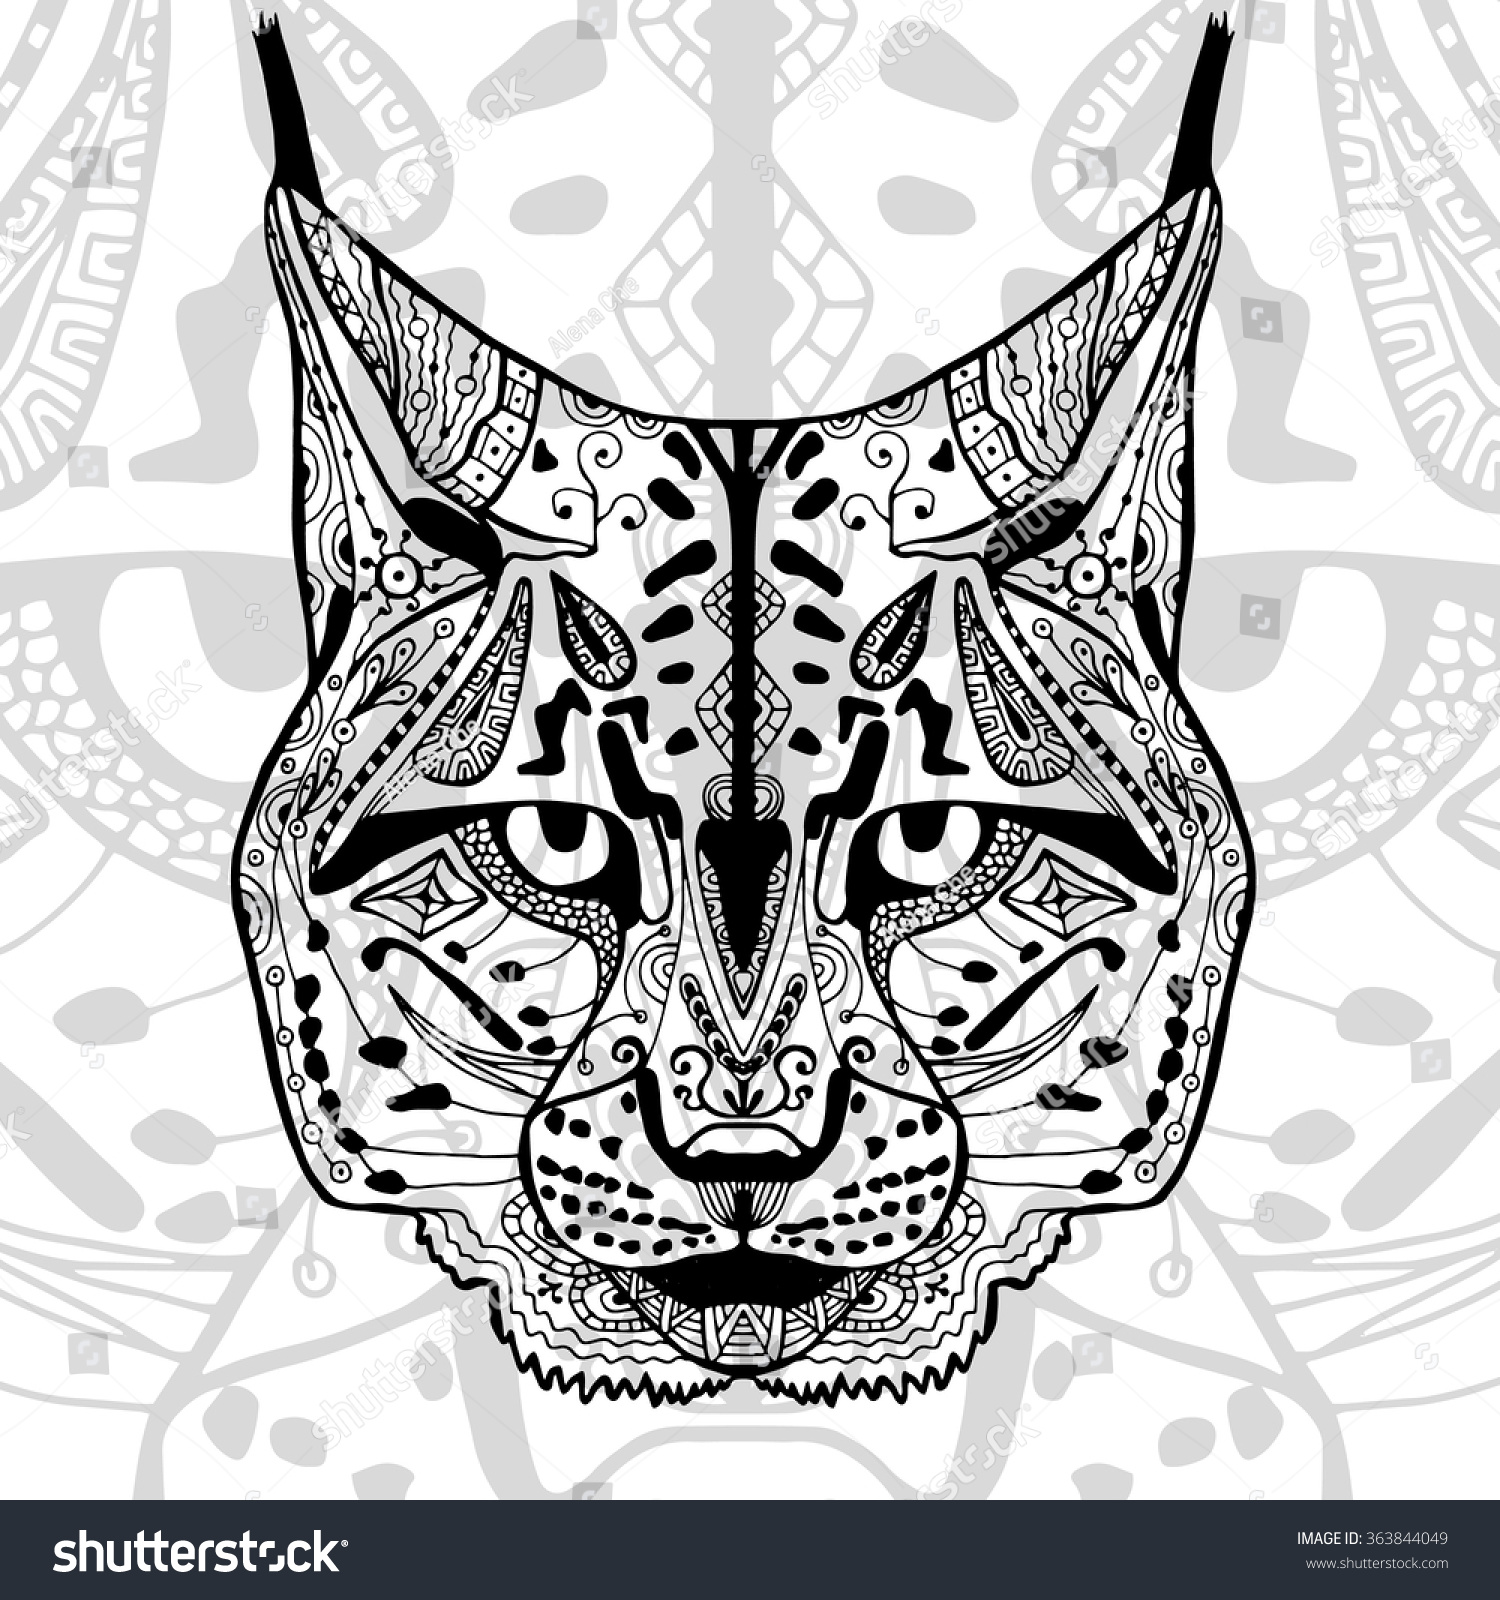 Coloring Book Adults Black White Bobcat Stock Vector Royalty Free ...